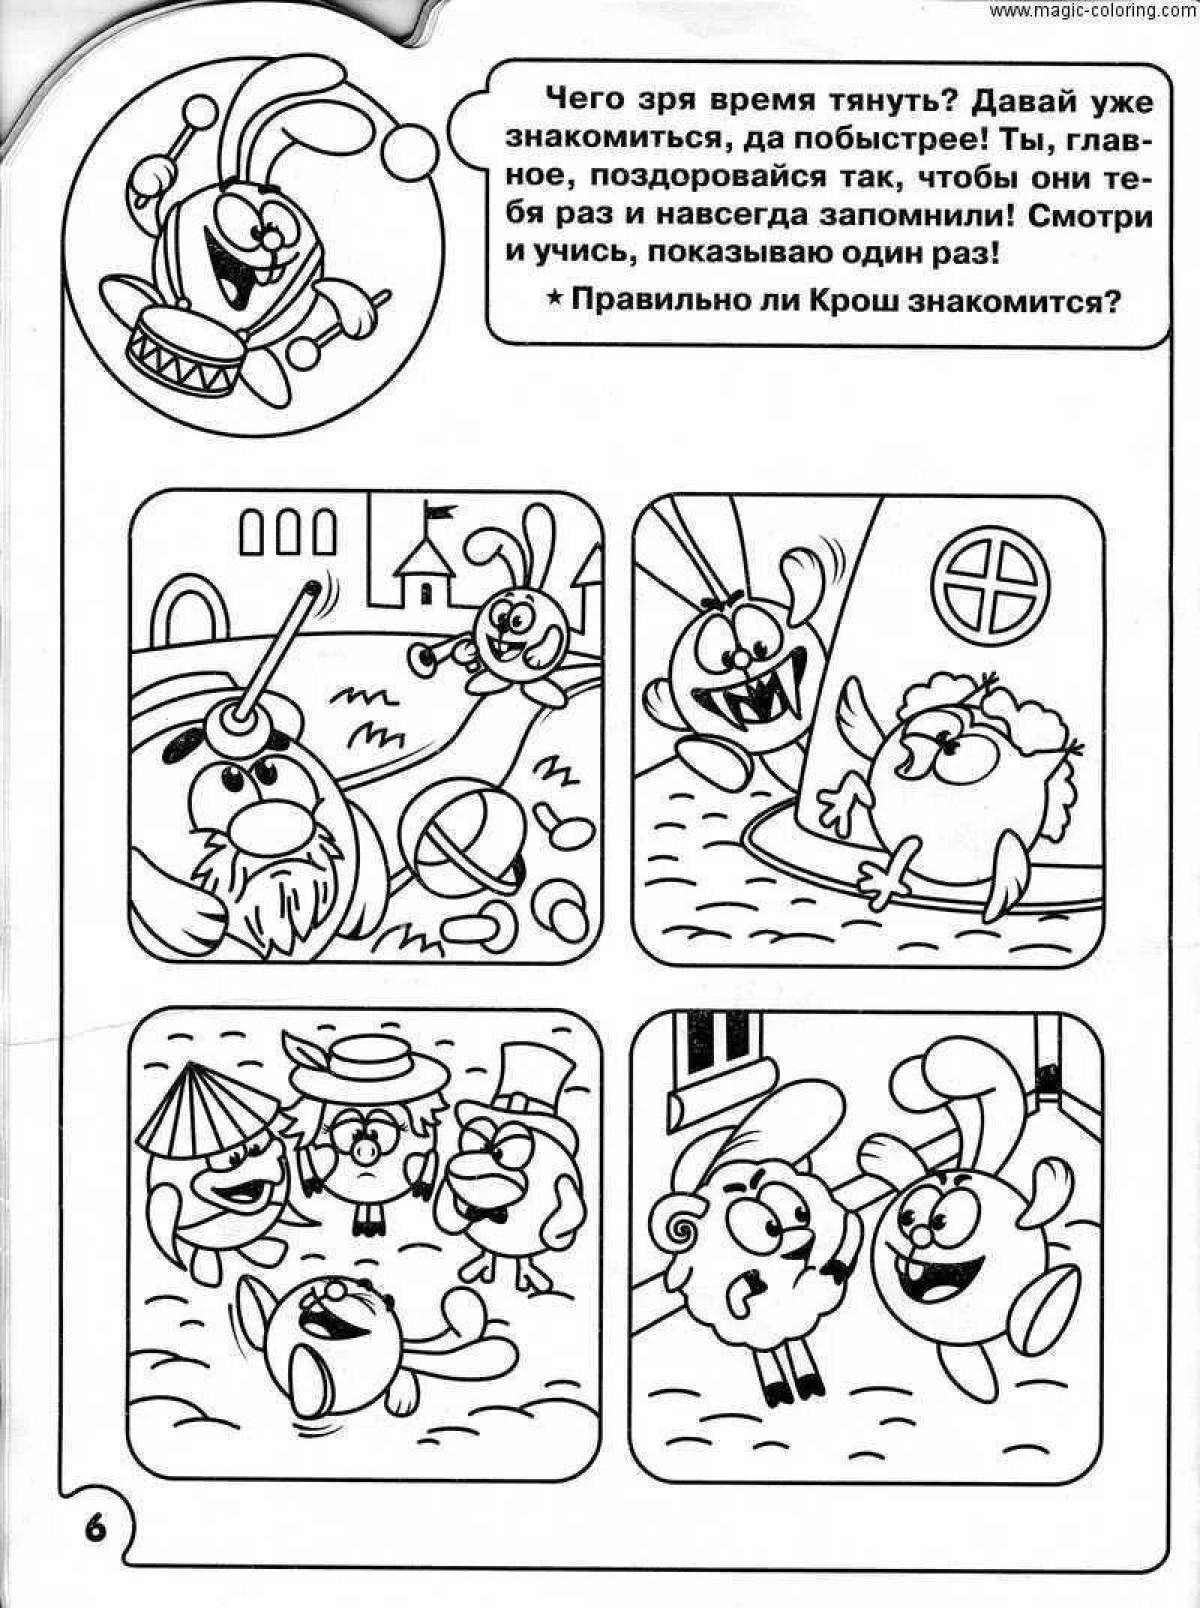 Color-frenzy comics coloring pages for girls